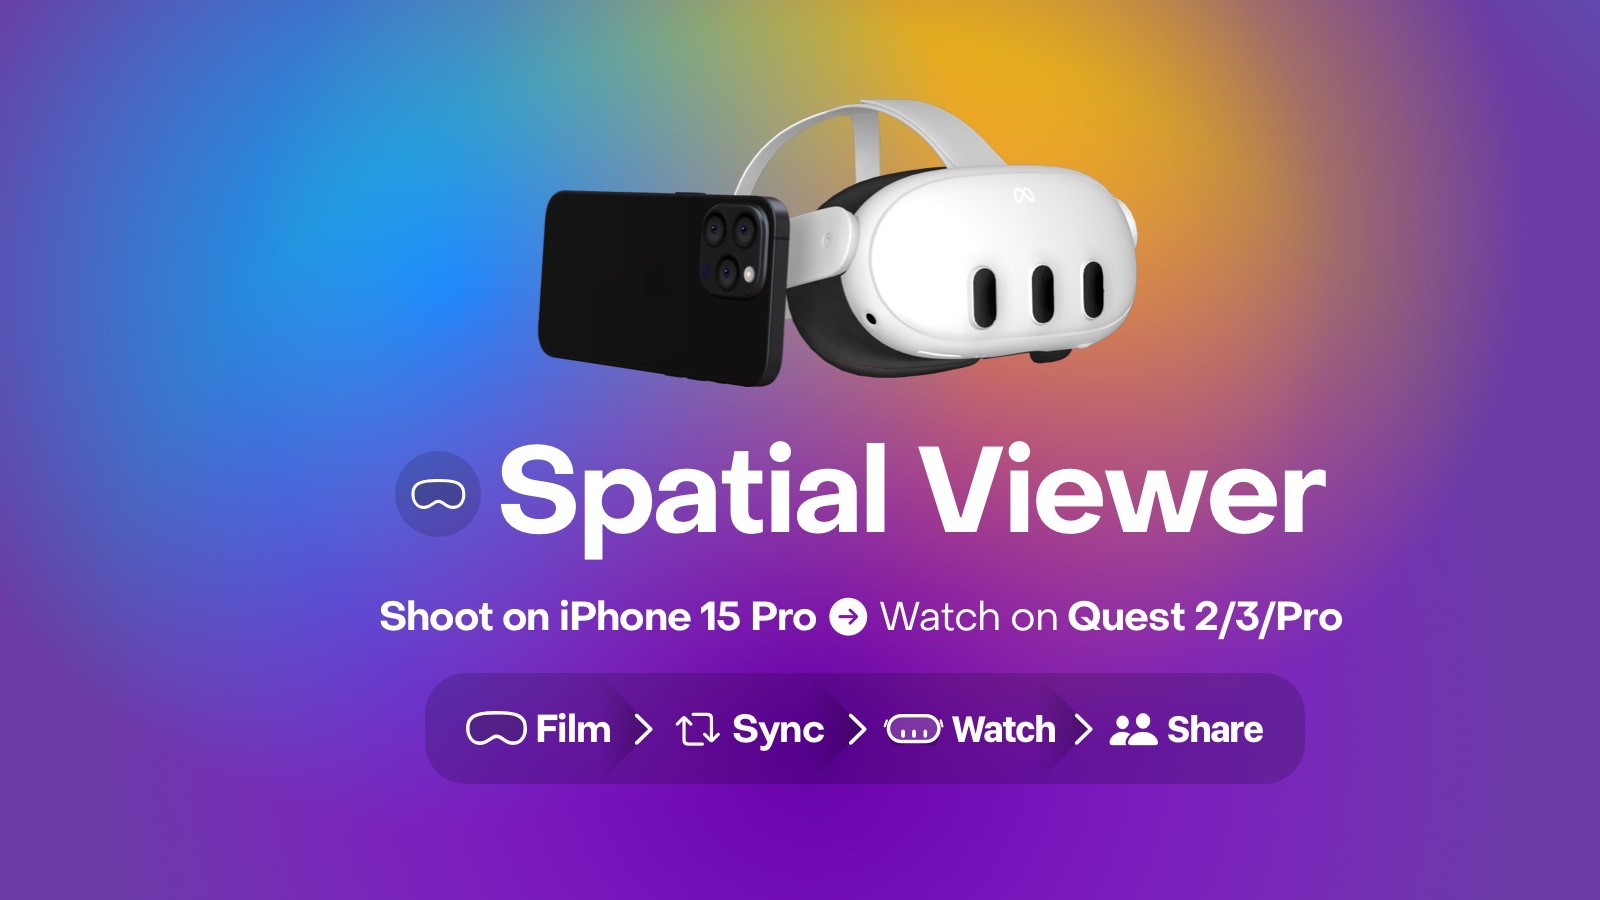 Marketing image showcasing the Spatial Viewer iPhone and Oculus apps